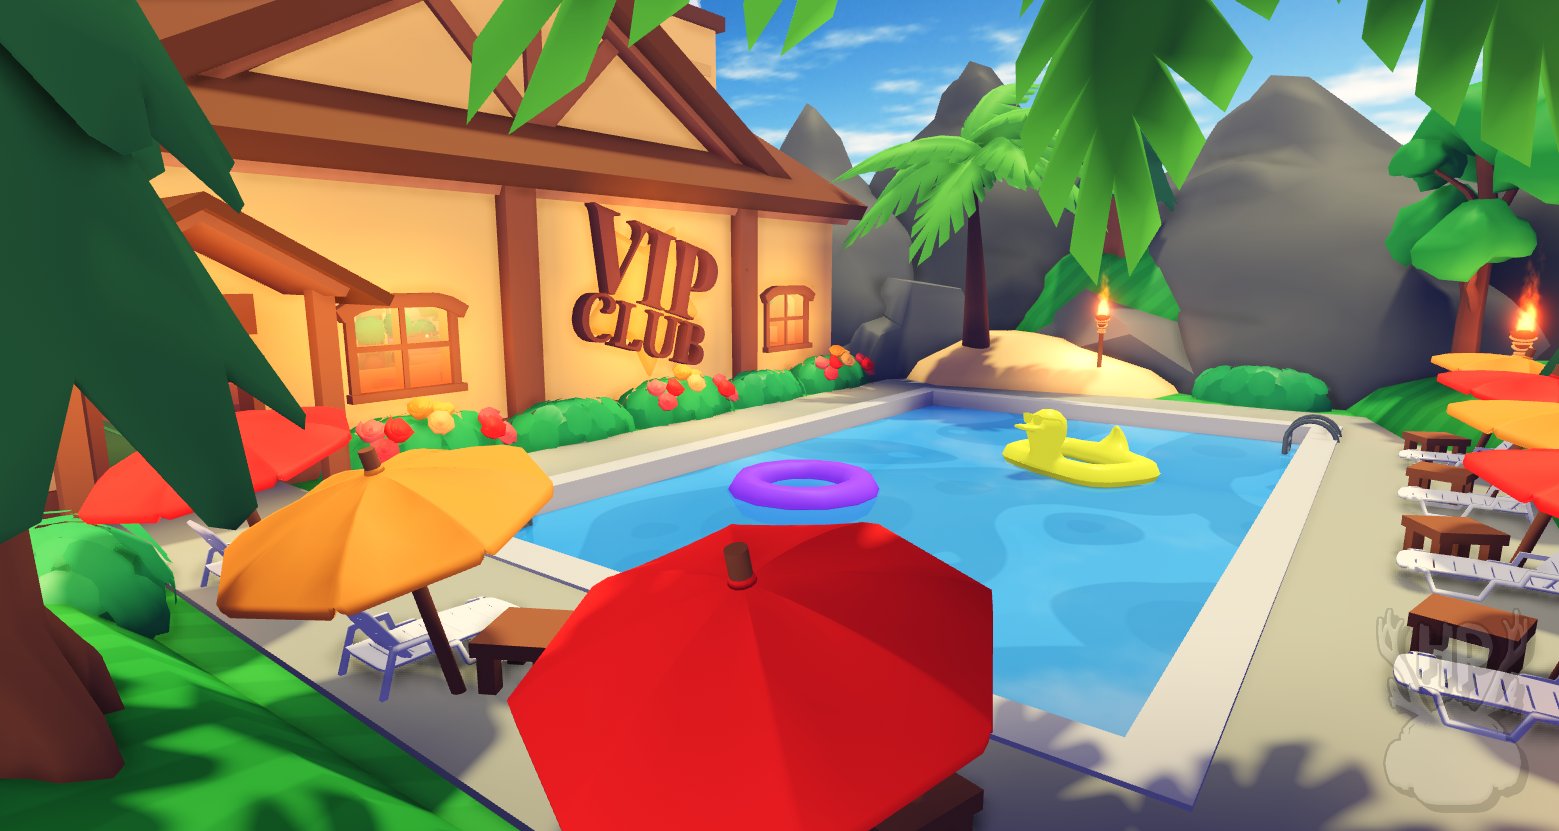 Code Honey On Twitter If You Become A Vip In Overlook Bay You Get This Free Exclusive Pet And Access To Our Vip Club In Game Plus The Vip Rank Next To - our alicorn club roblox